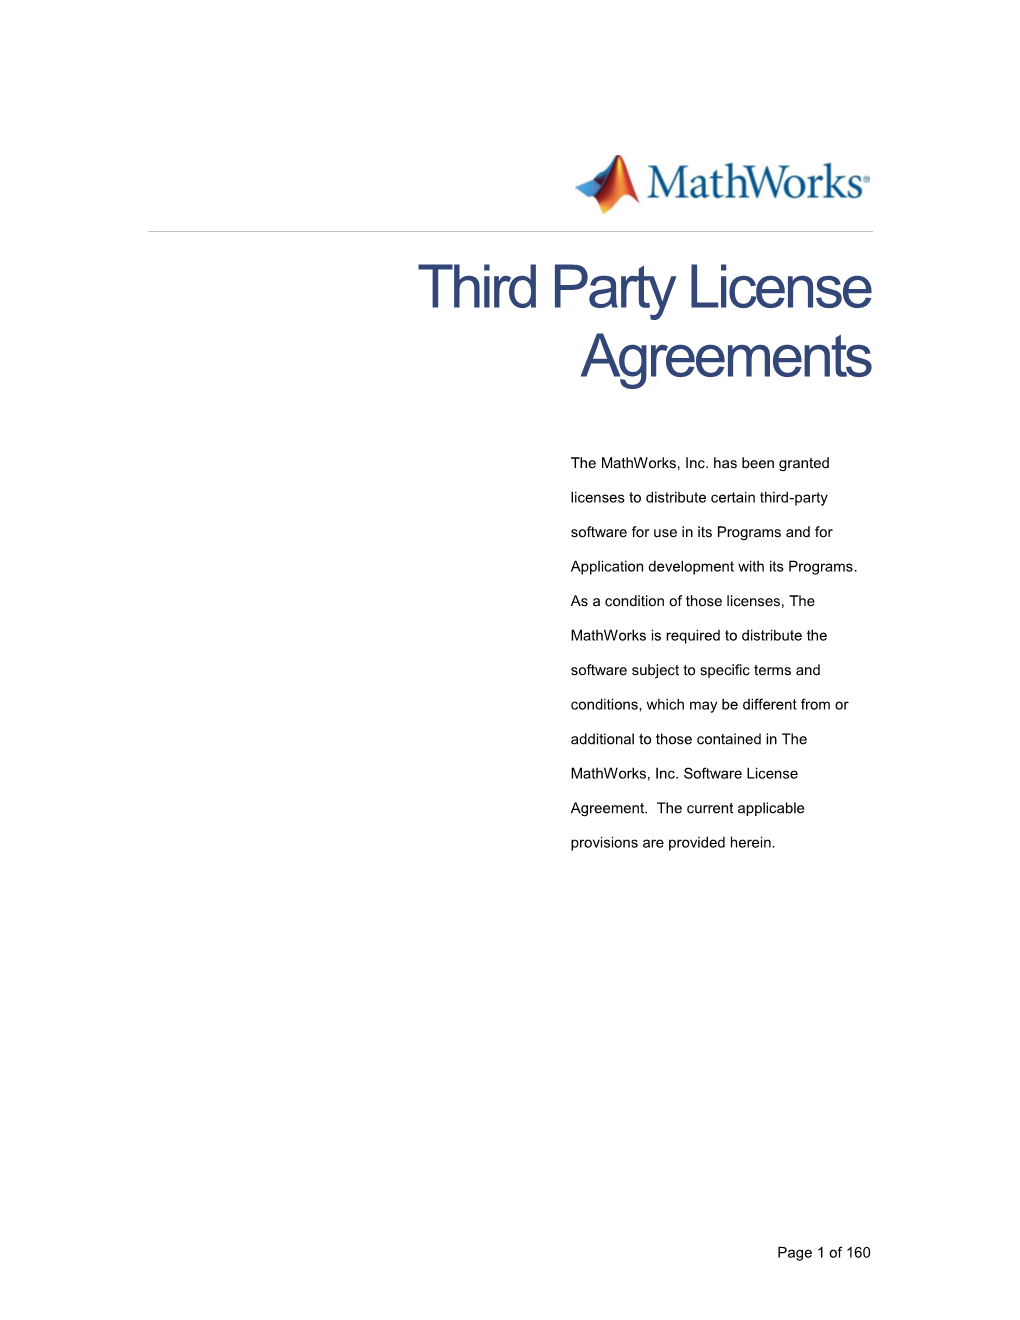 Third Party License Agreements